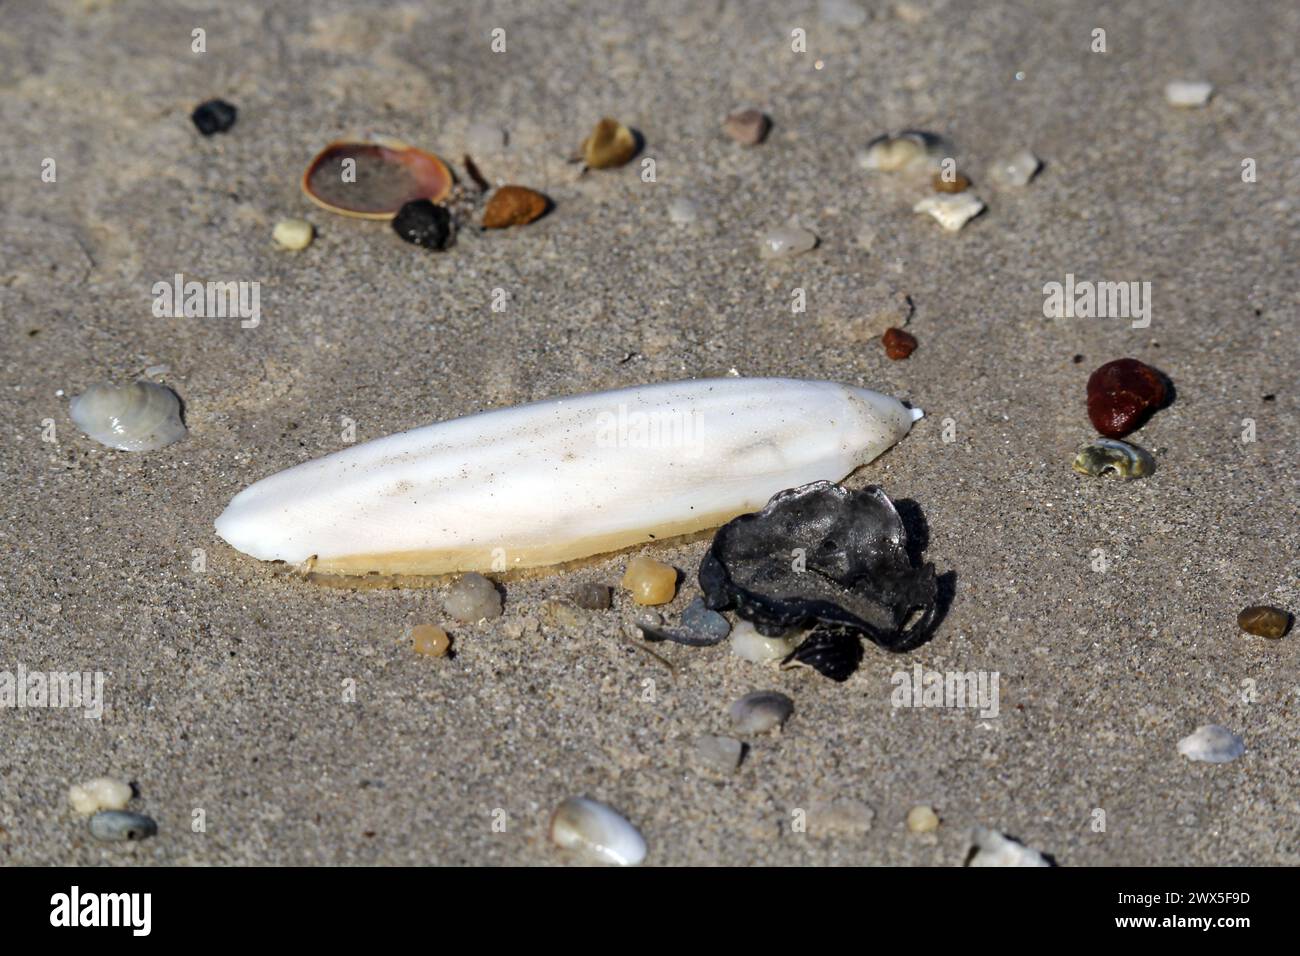 Cuttlefish bone on a beach with sand and shells Stock Photo